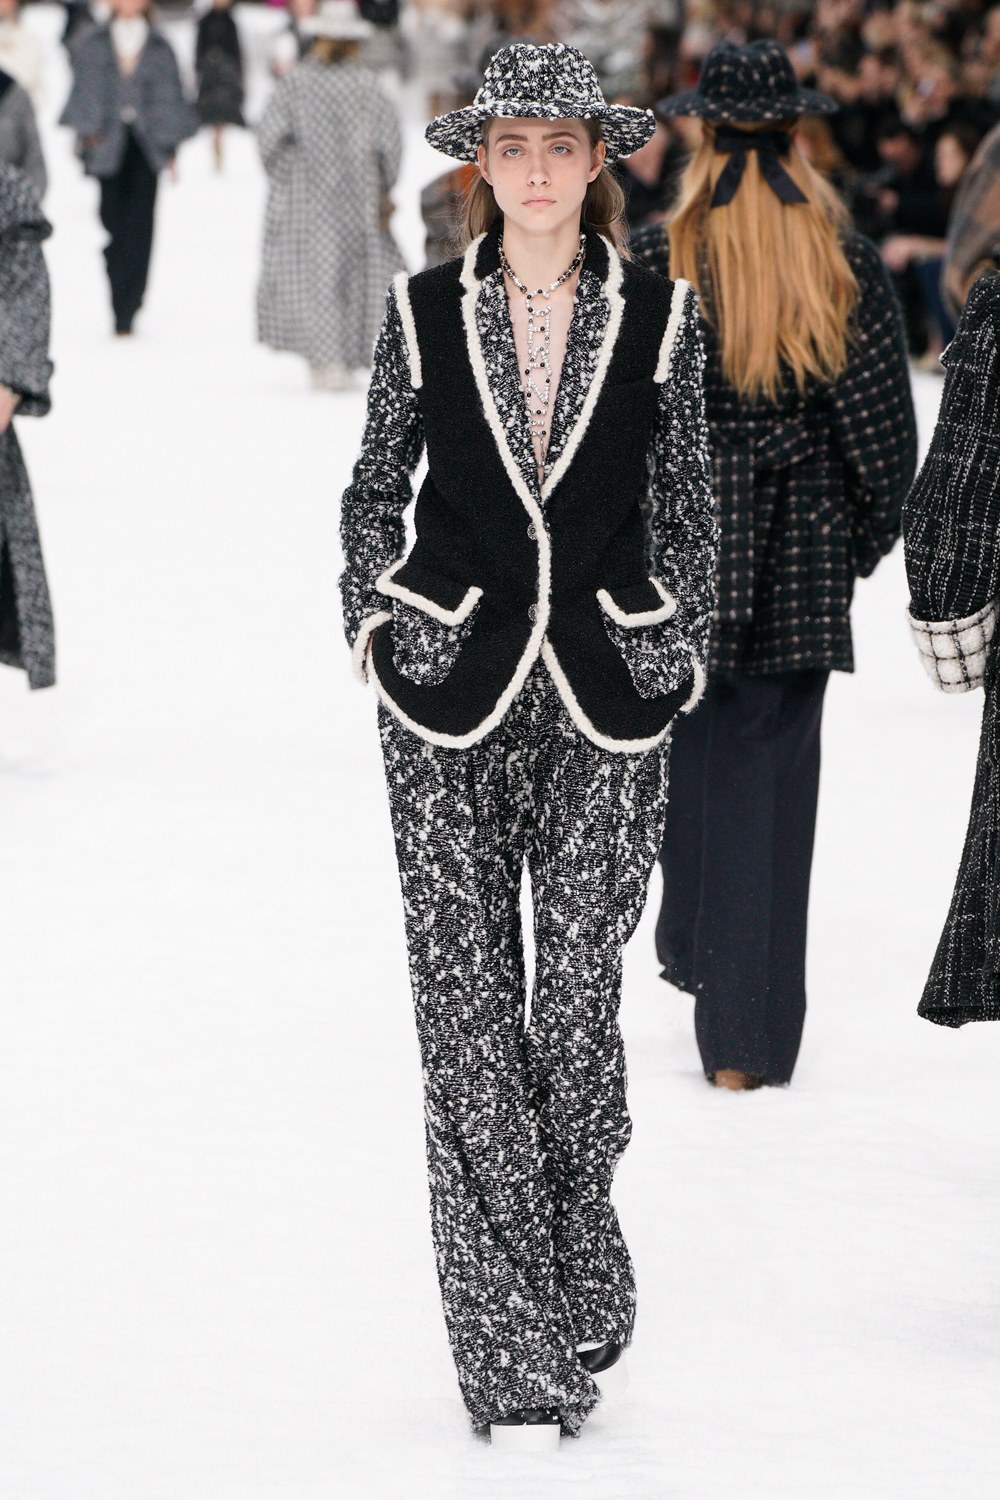 niemand Pardon Reusachtig Chanel at Paris Fashion Week 2019: Inside Karl Lagerfeld's Chalet Inspired  Final Collection - A&E Magazine